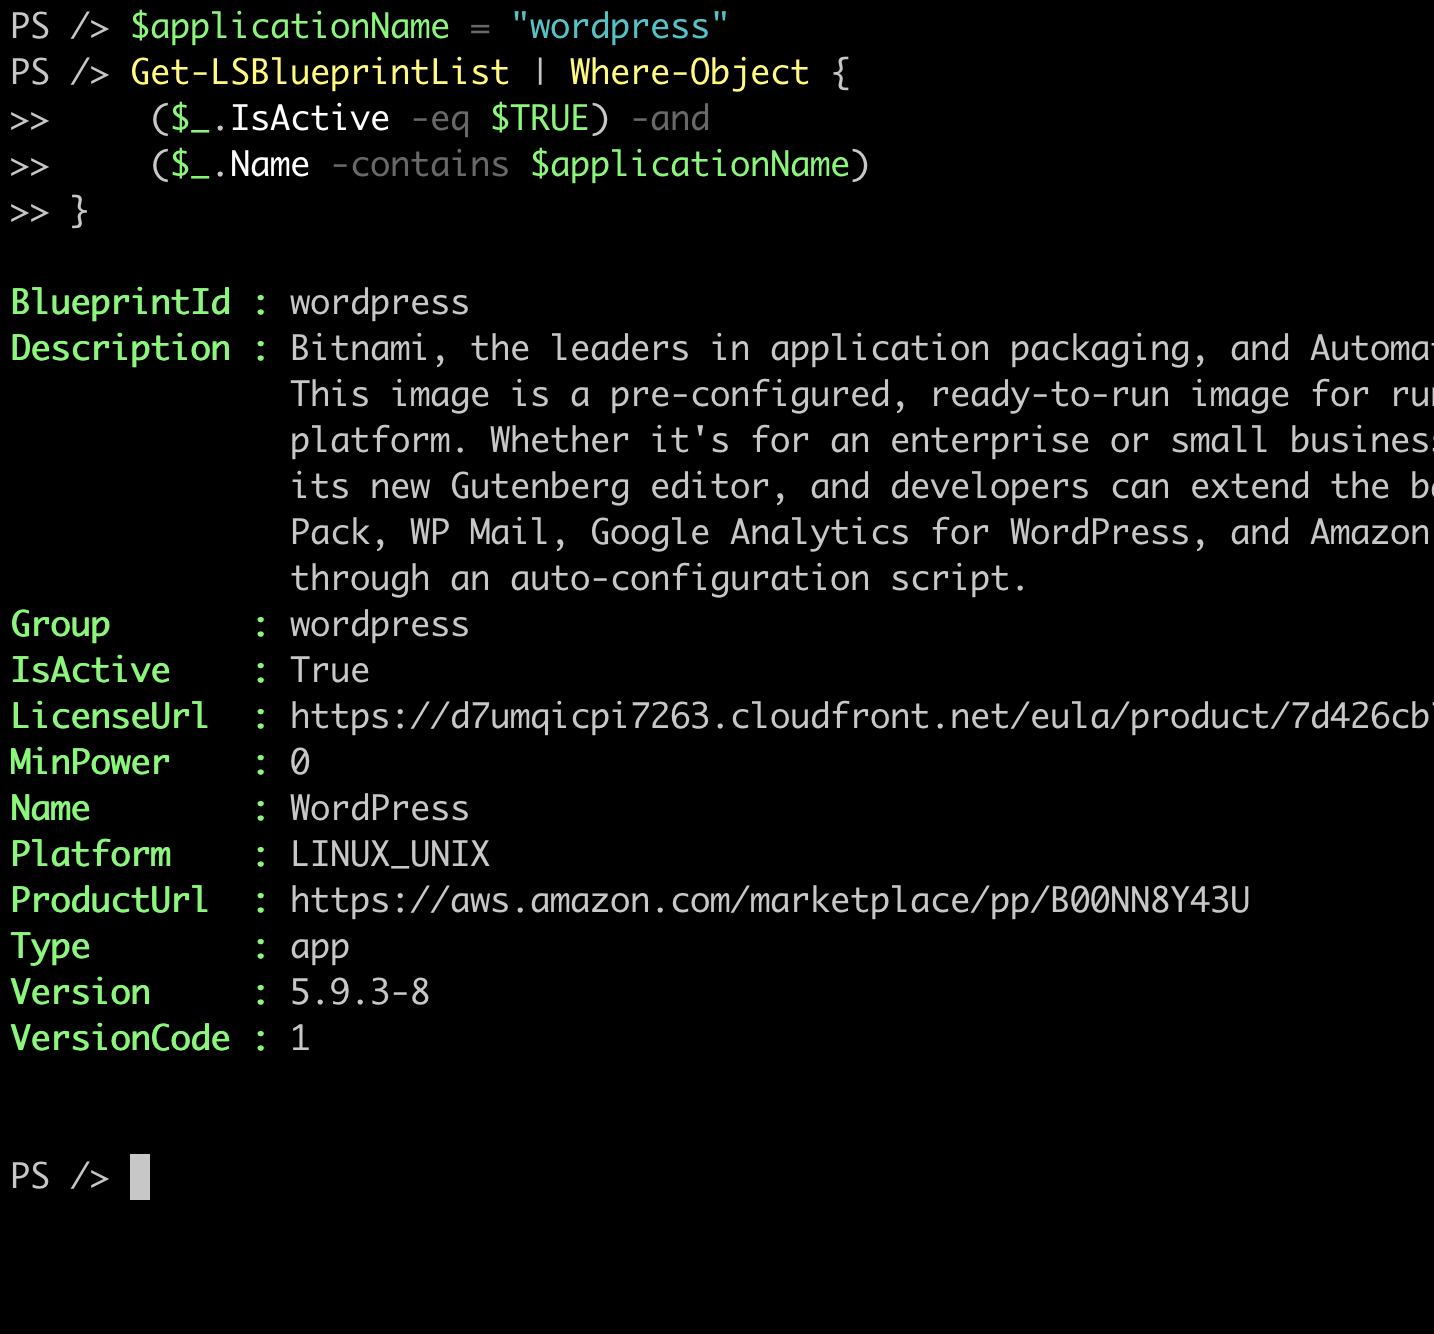 Screenshot of the terminal showing the results of Get-LSBlueprintList cmdlet with contains filter, filtering by the word wordpress and isactive set to true